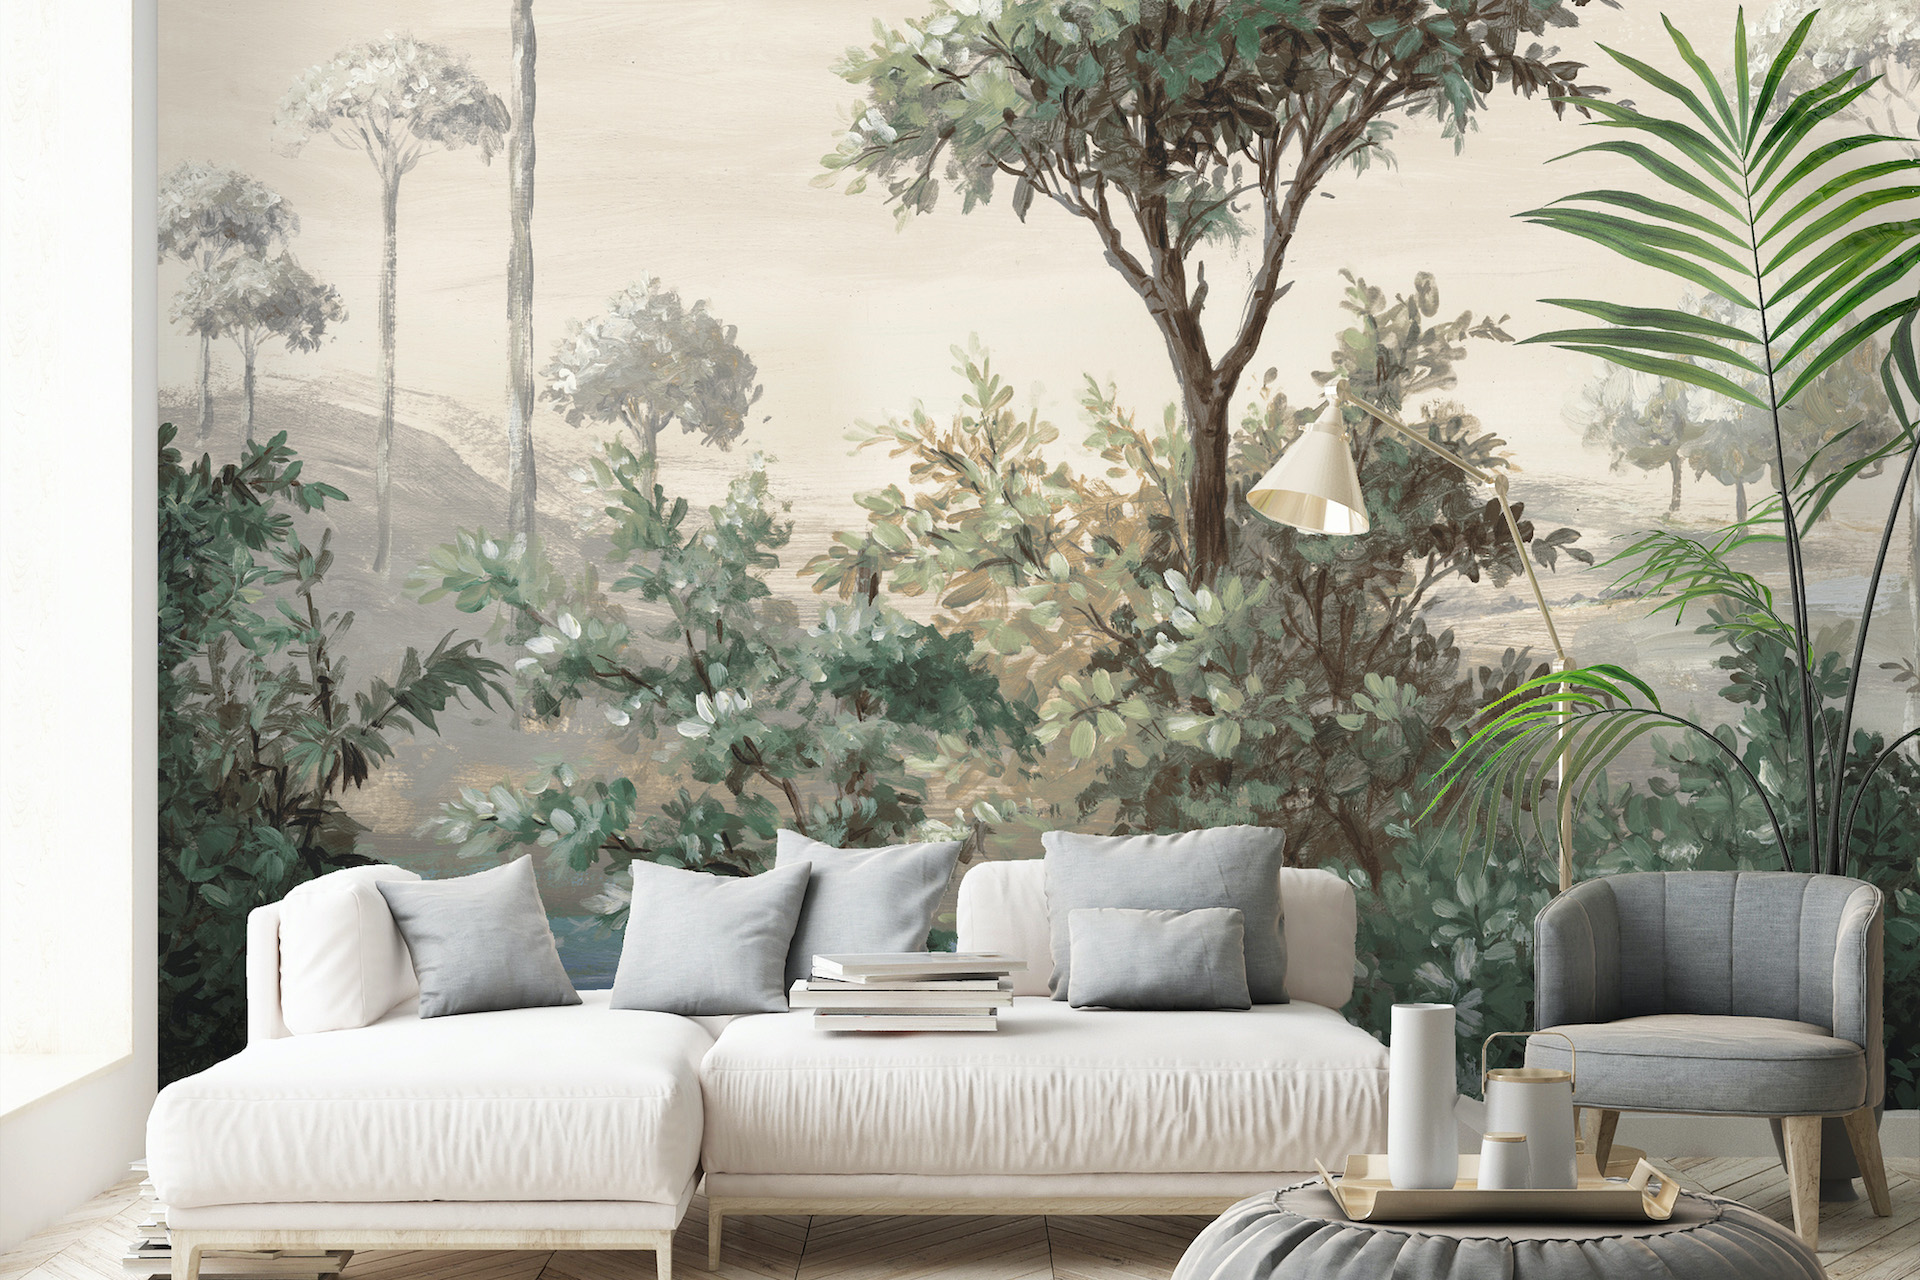 interiors inspired by nature